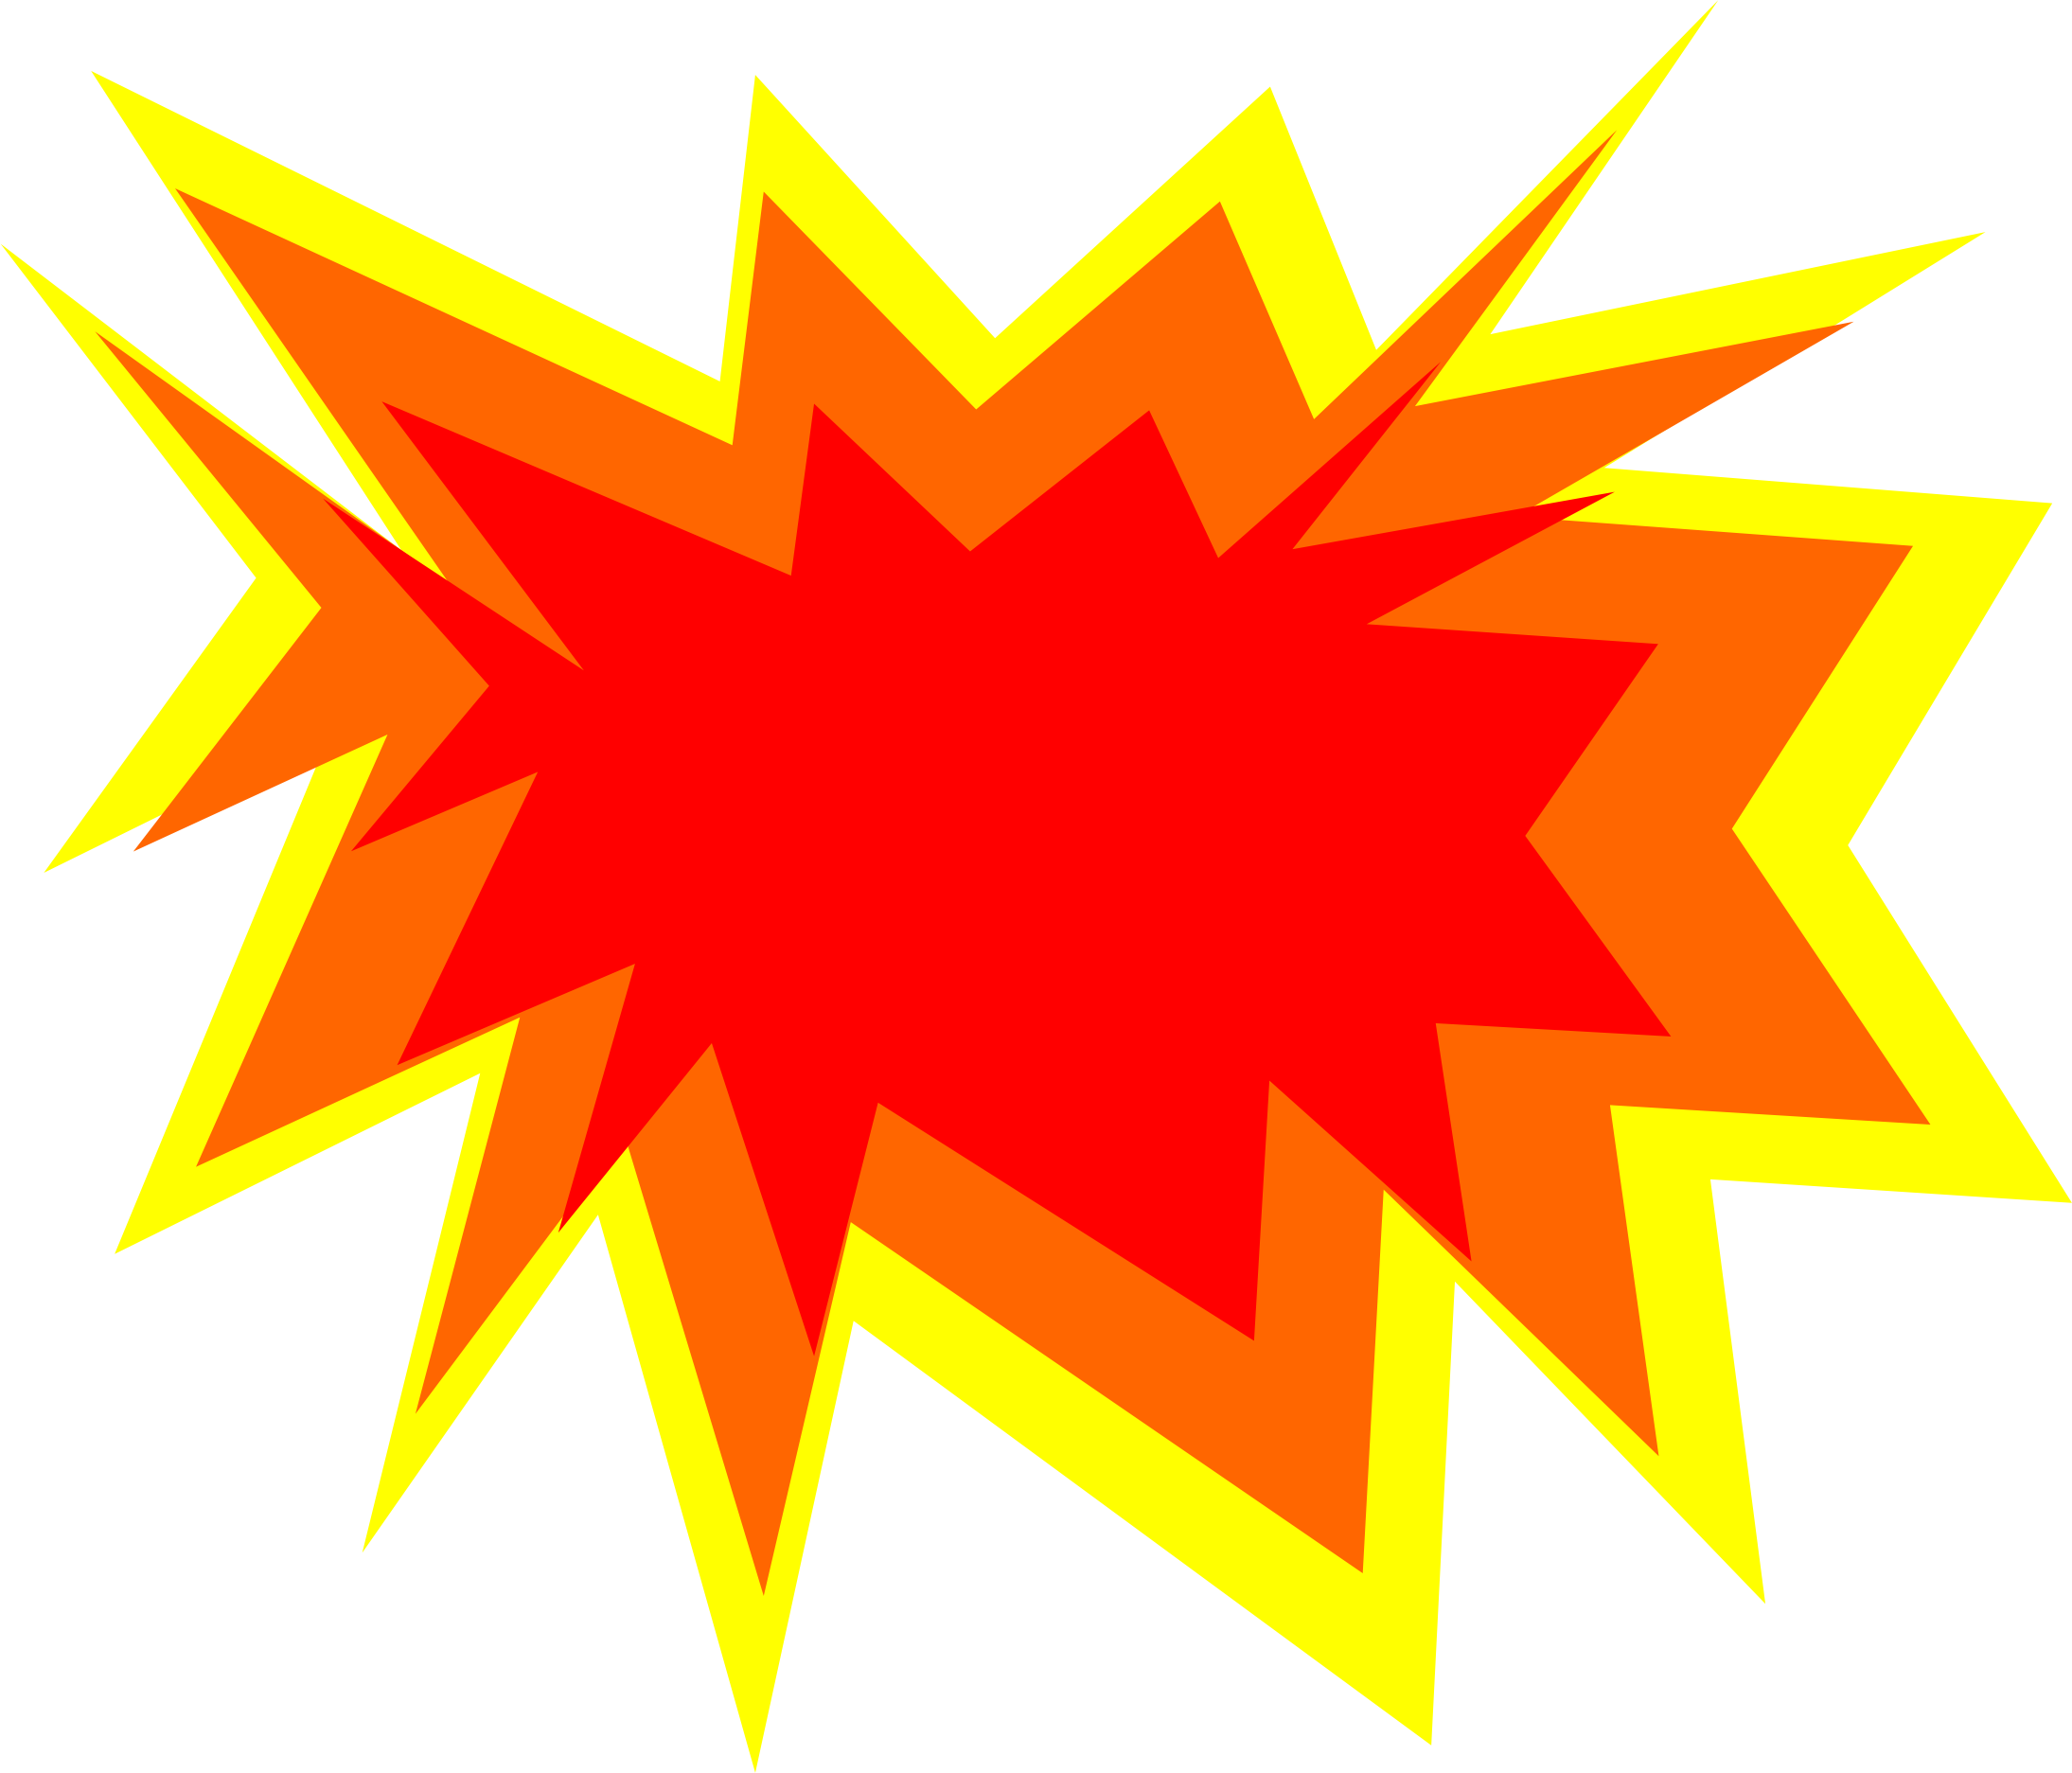 Animated explosion clipart.